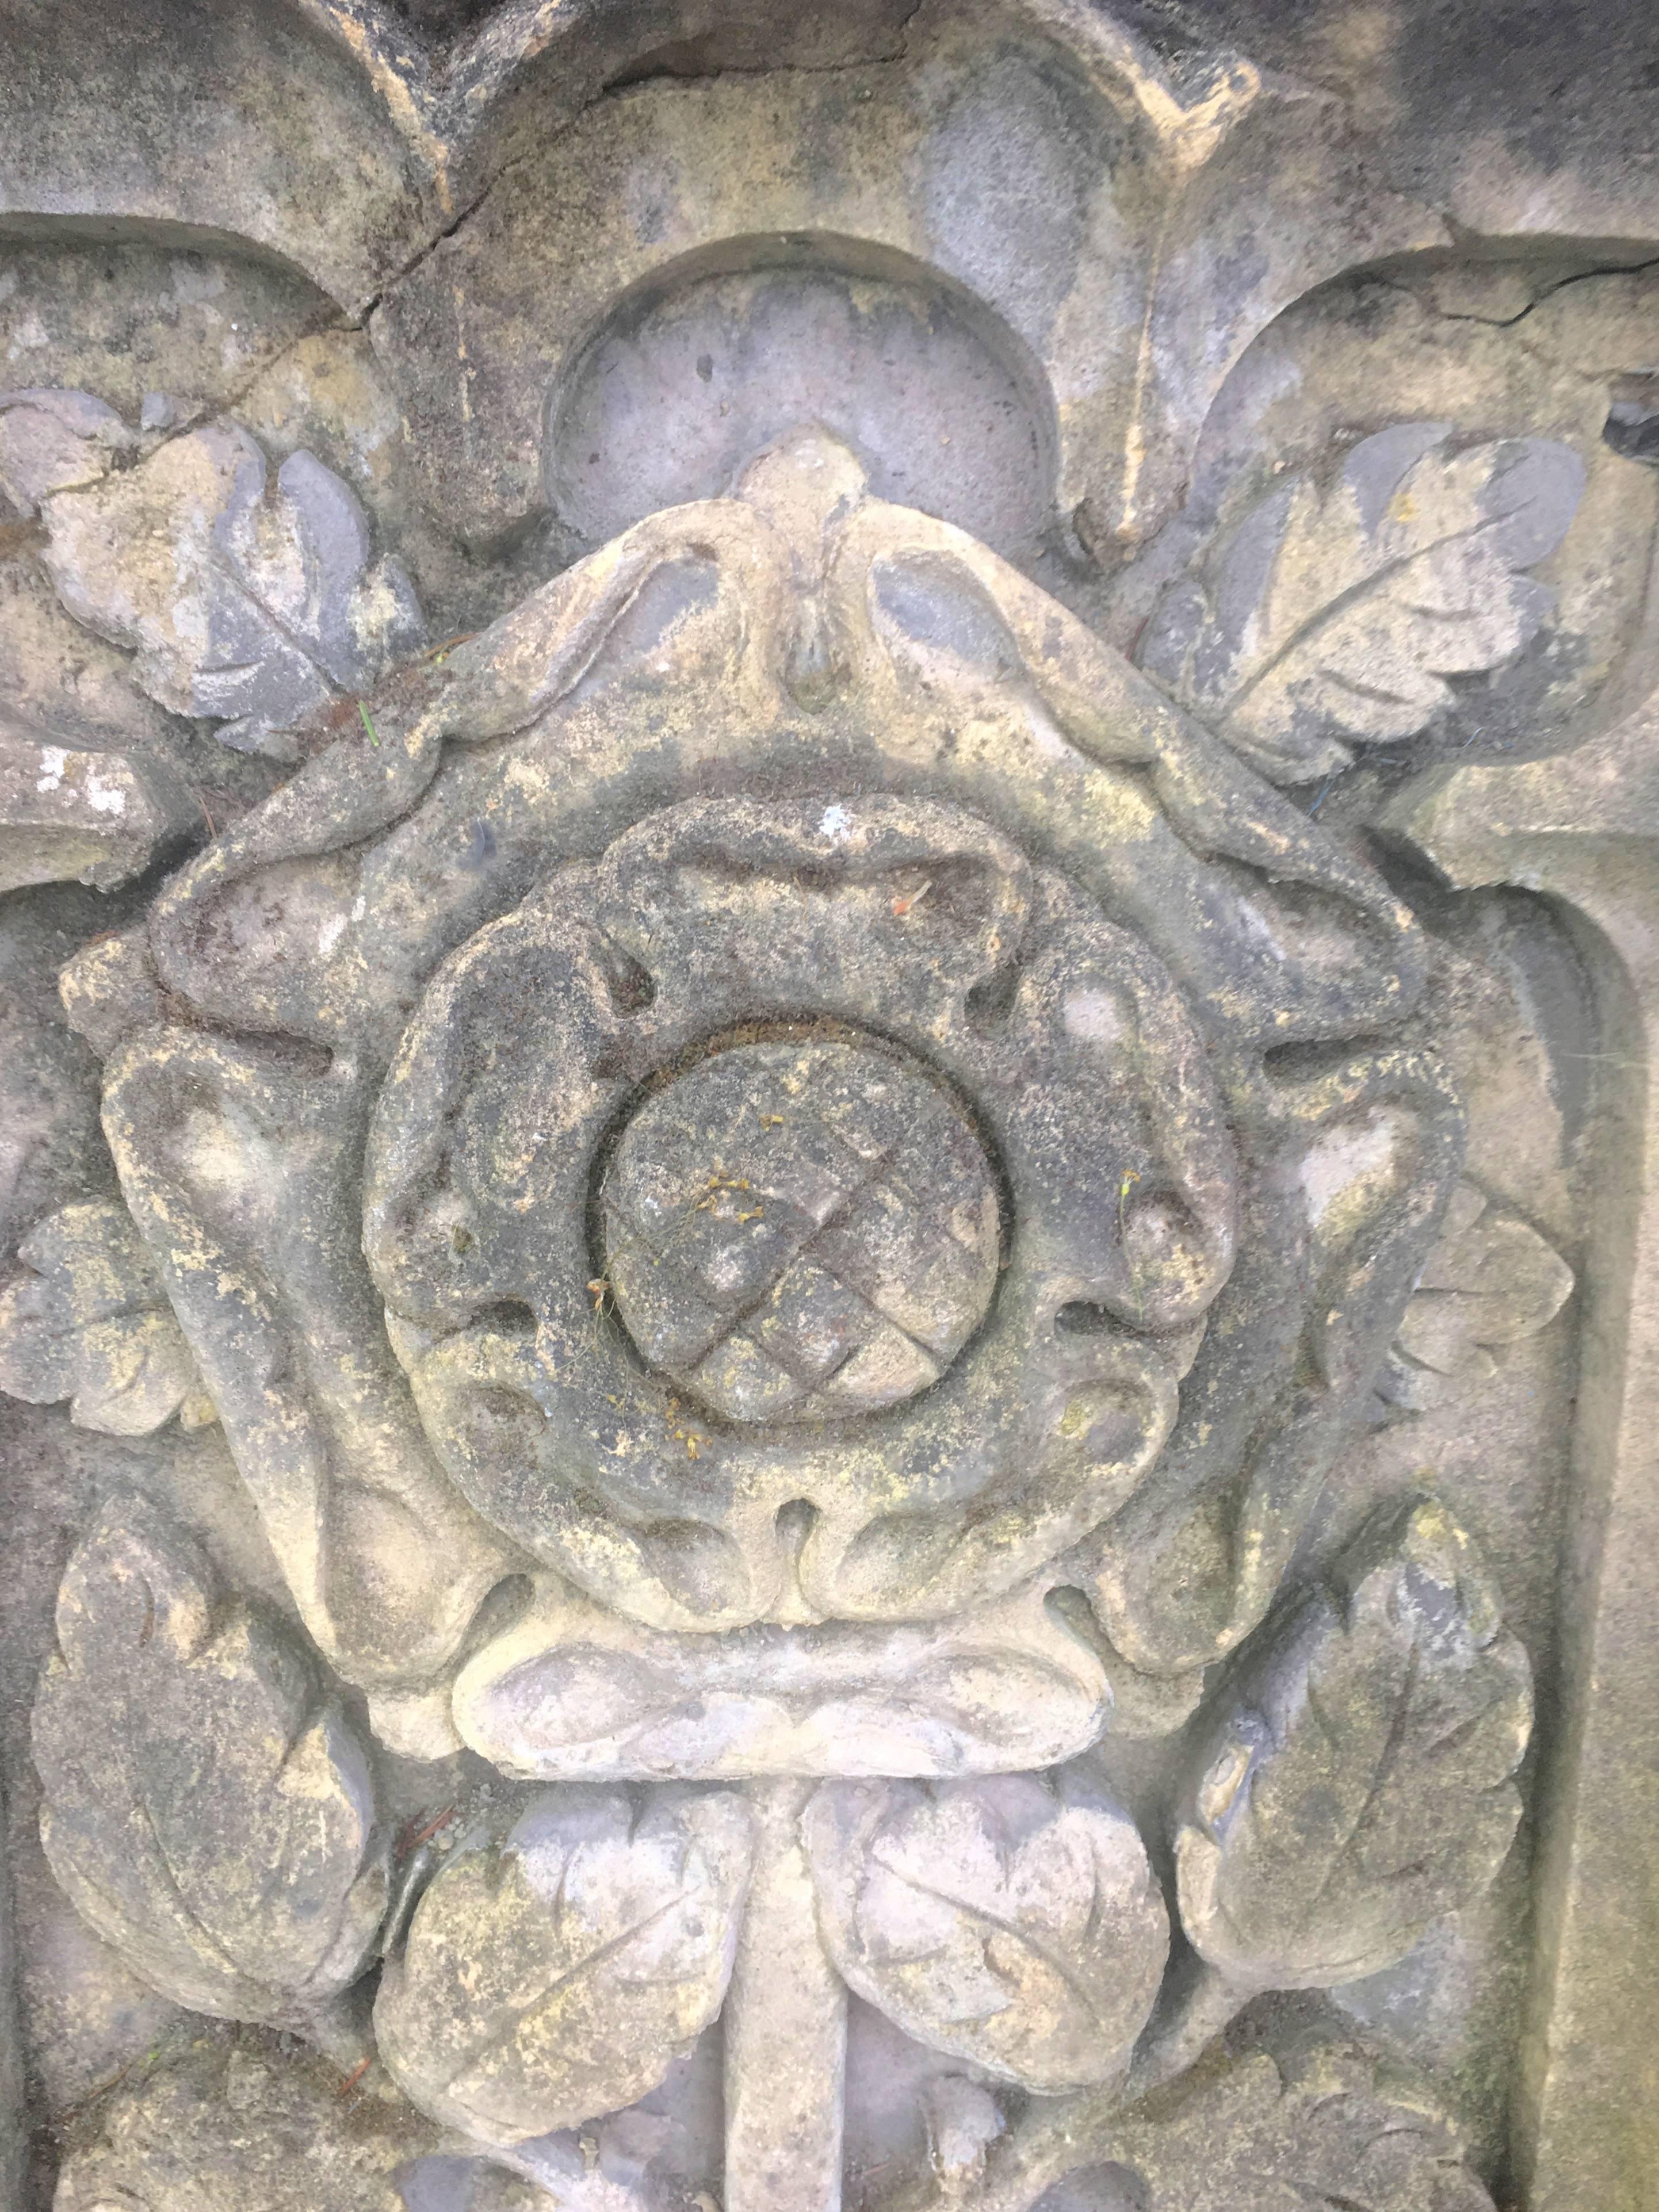 These fabulous and very large hand-carved sandstone plaques depict the heraldic symbols of the Houses of York and Lancaster (the War of the Roses). In overall good antique condition, with old iron repairs to the sides and a few cracks, they are